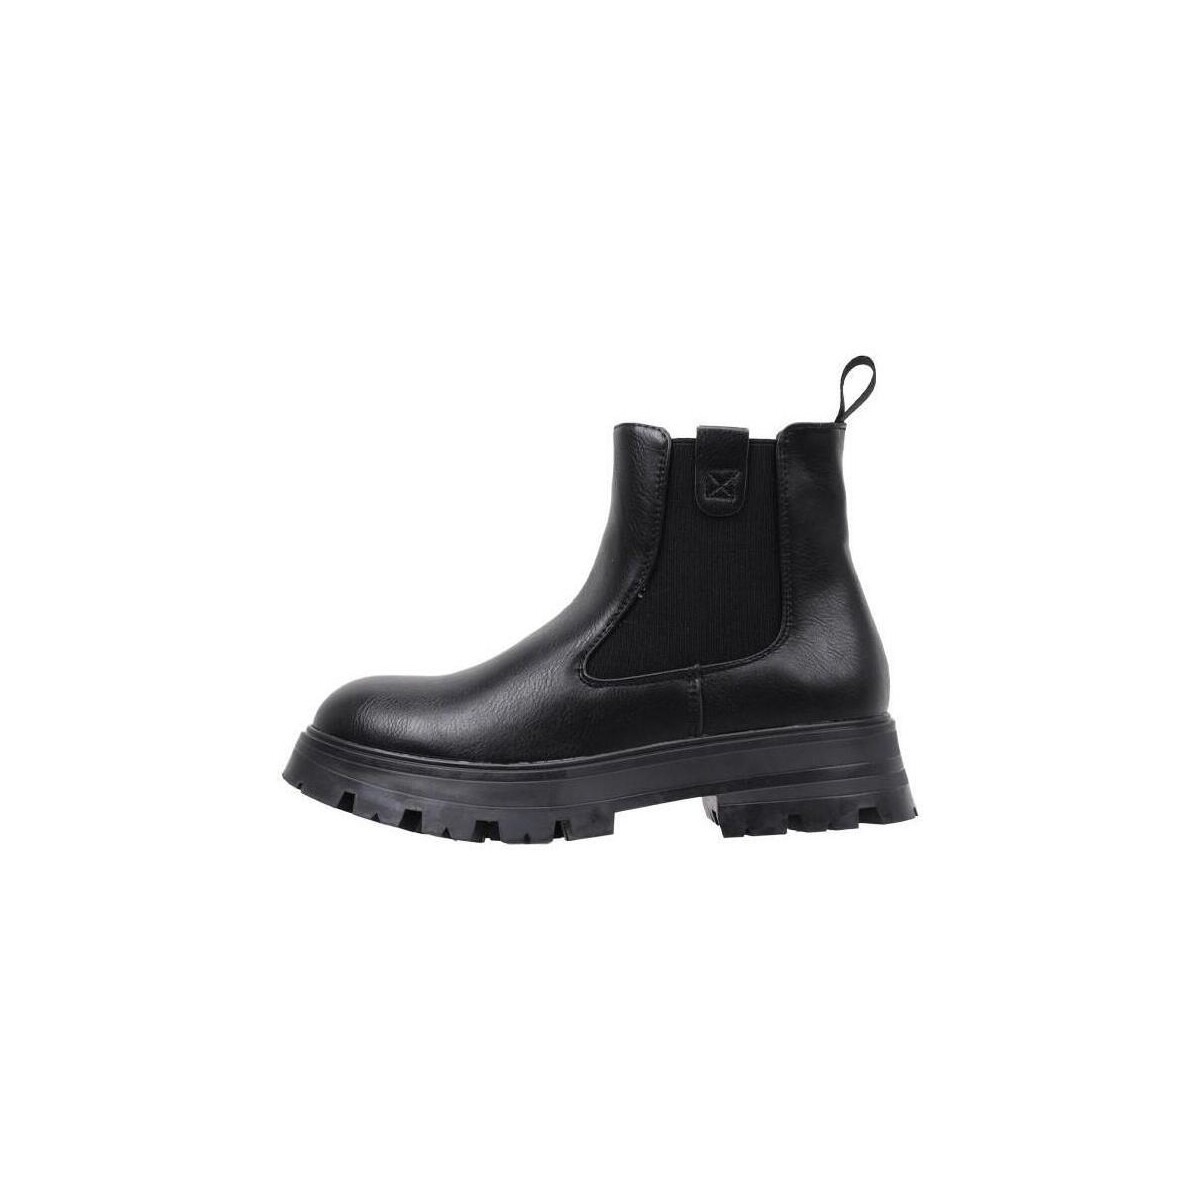 Krack - Womens Boots in Black from Spartoo GOOFASH